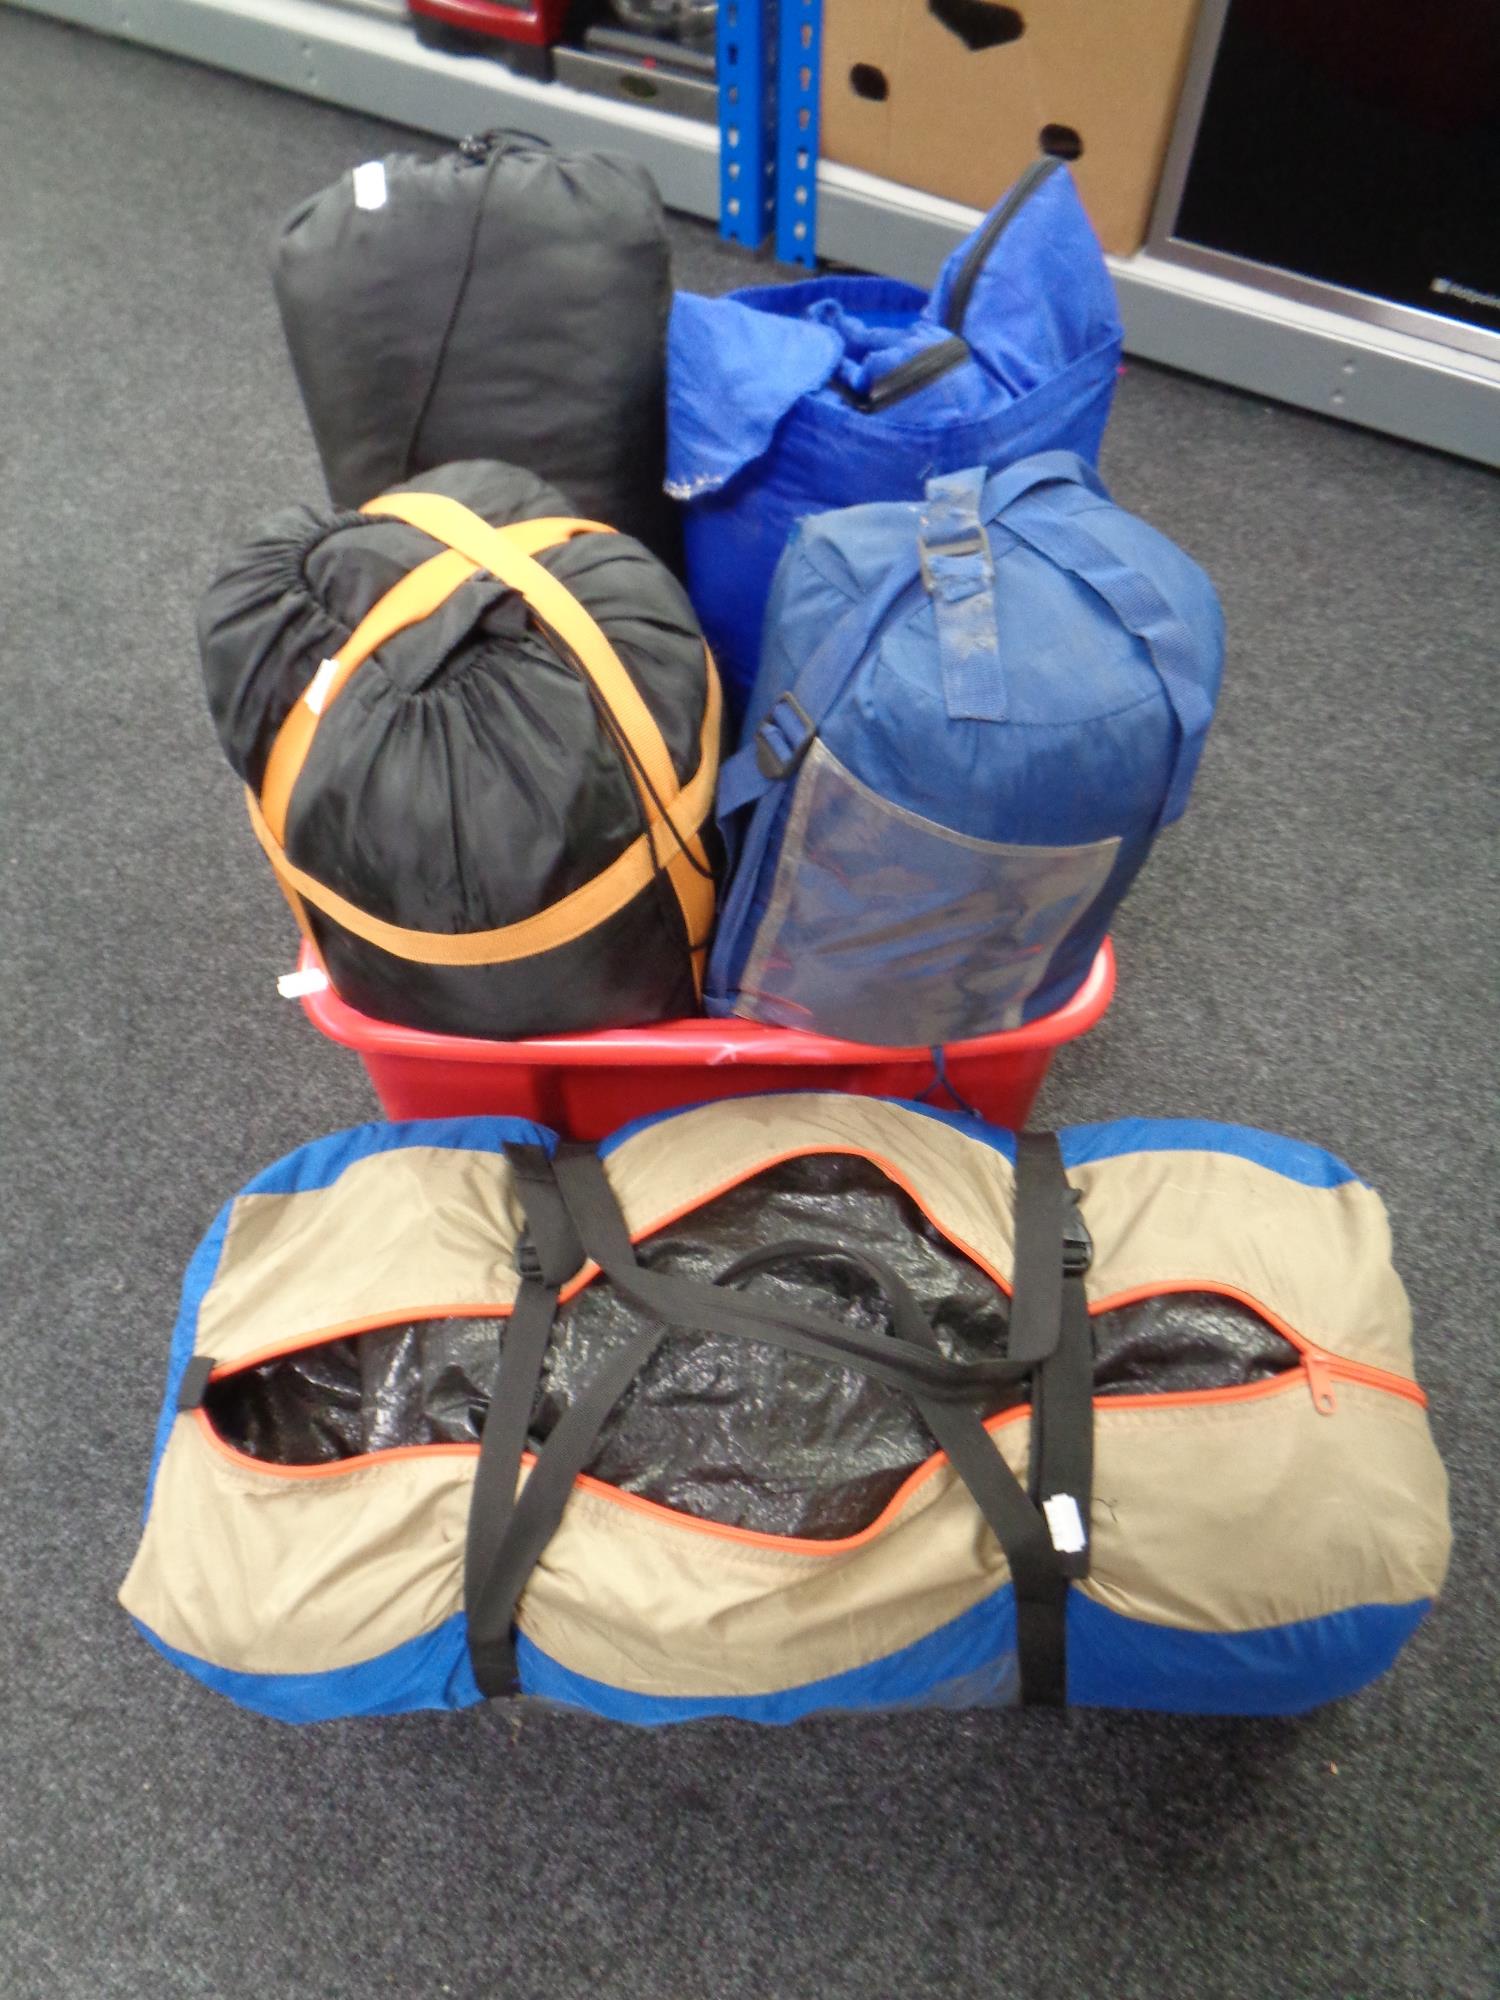 A tent in bag together with four assorted sleeping bags